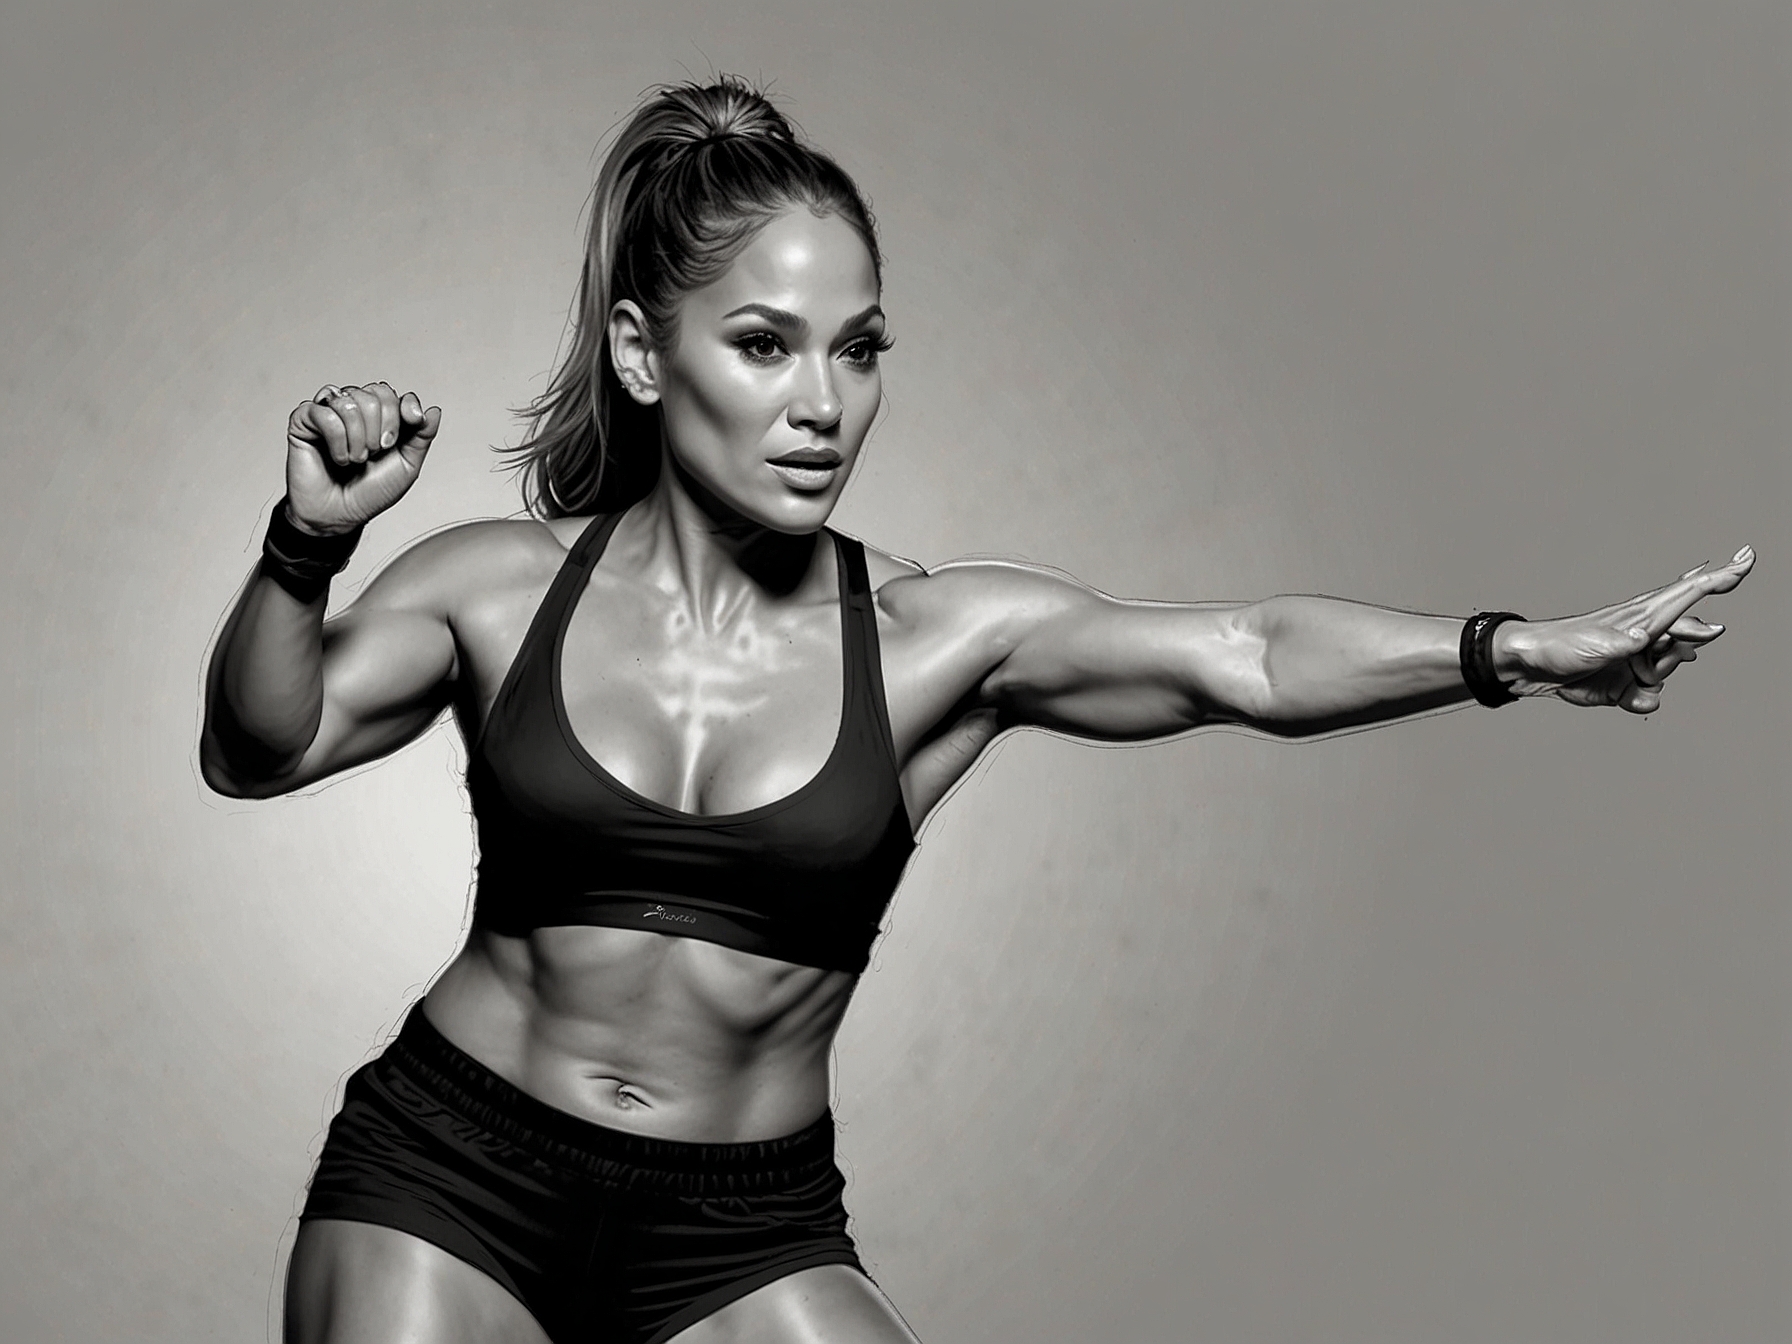 Jennifer Lopez engaging in a fitness routine, illustrating her dedication to maintaining her youthful vigor through disciplined exercise, as part of her holistic wellness approach.